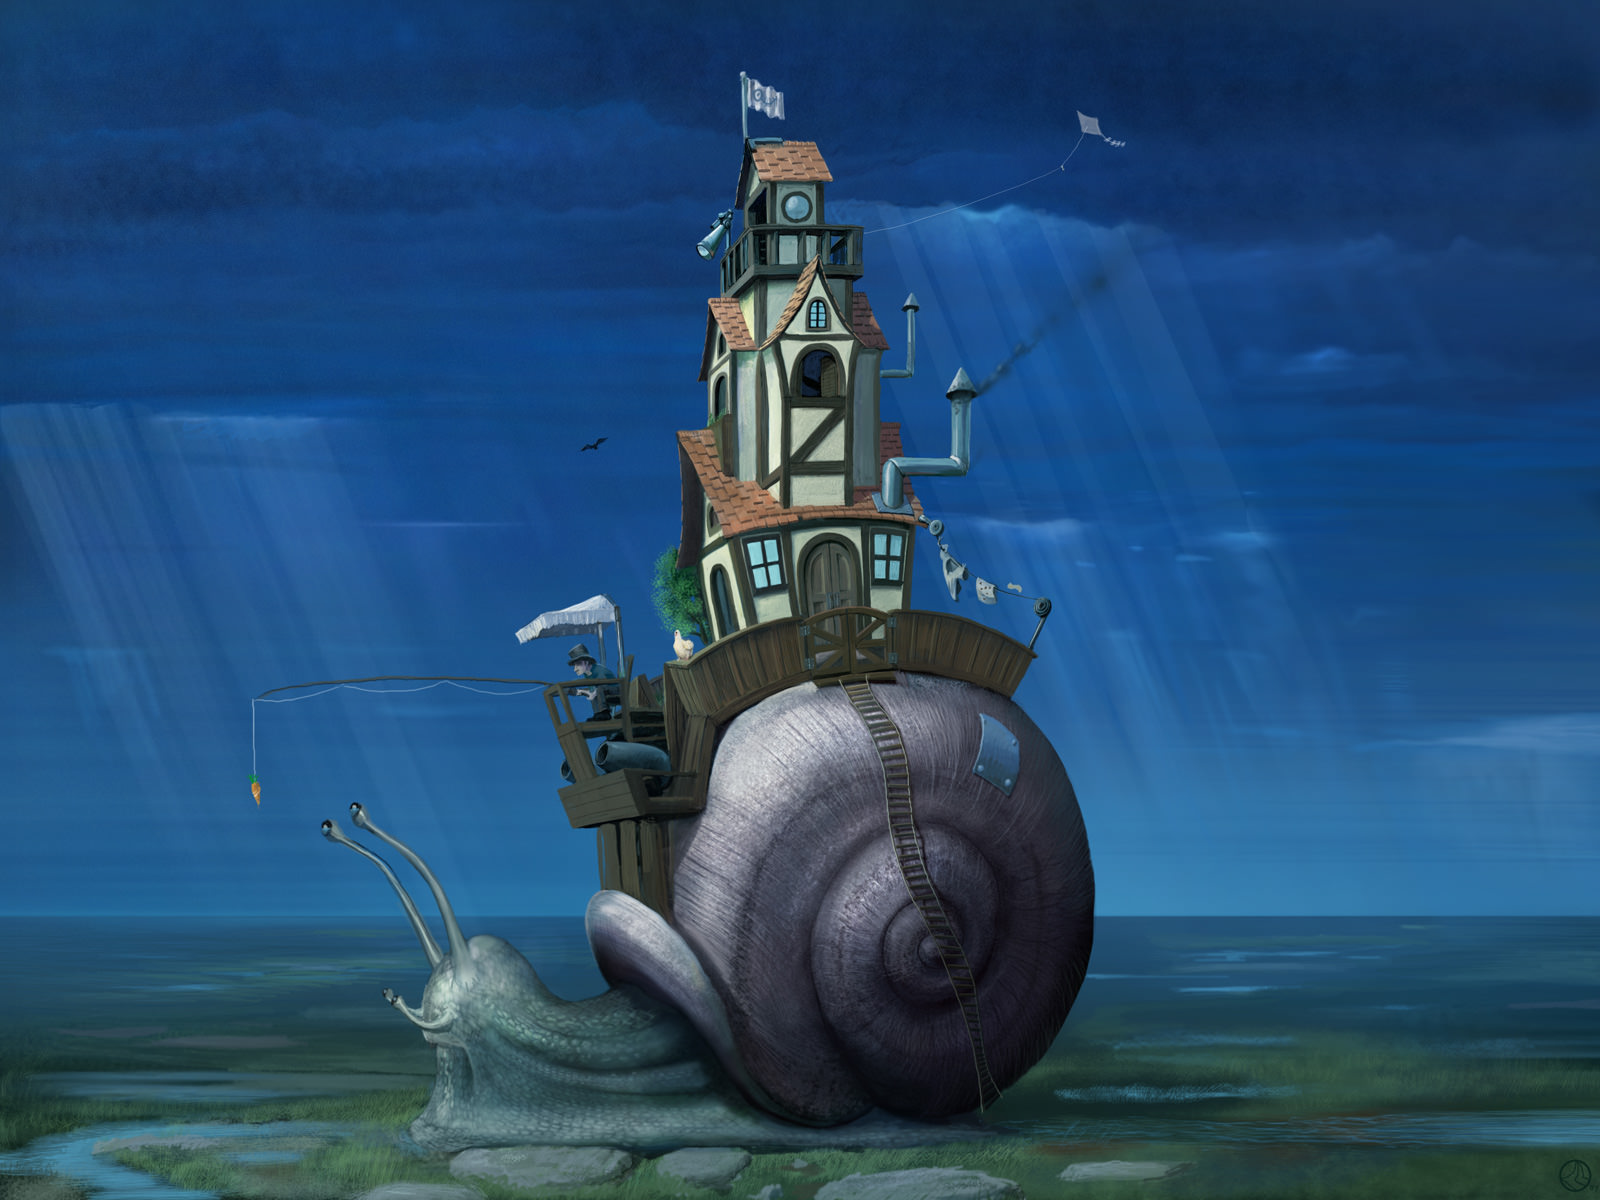 Snail With House